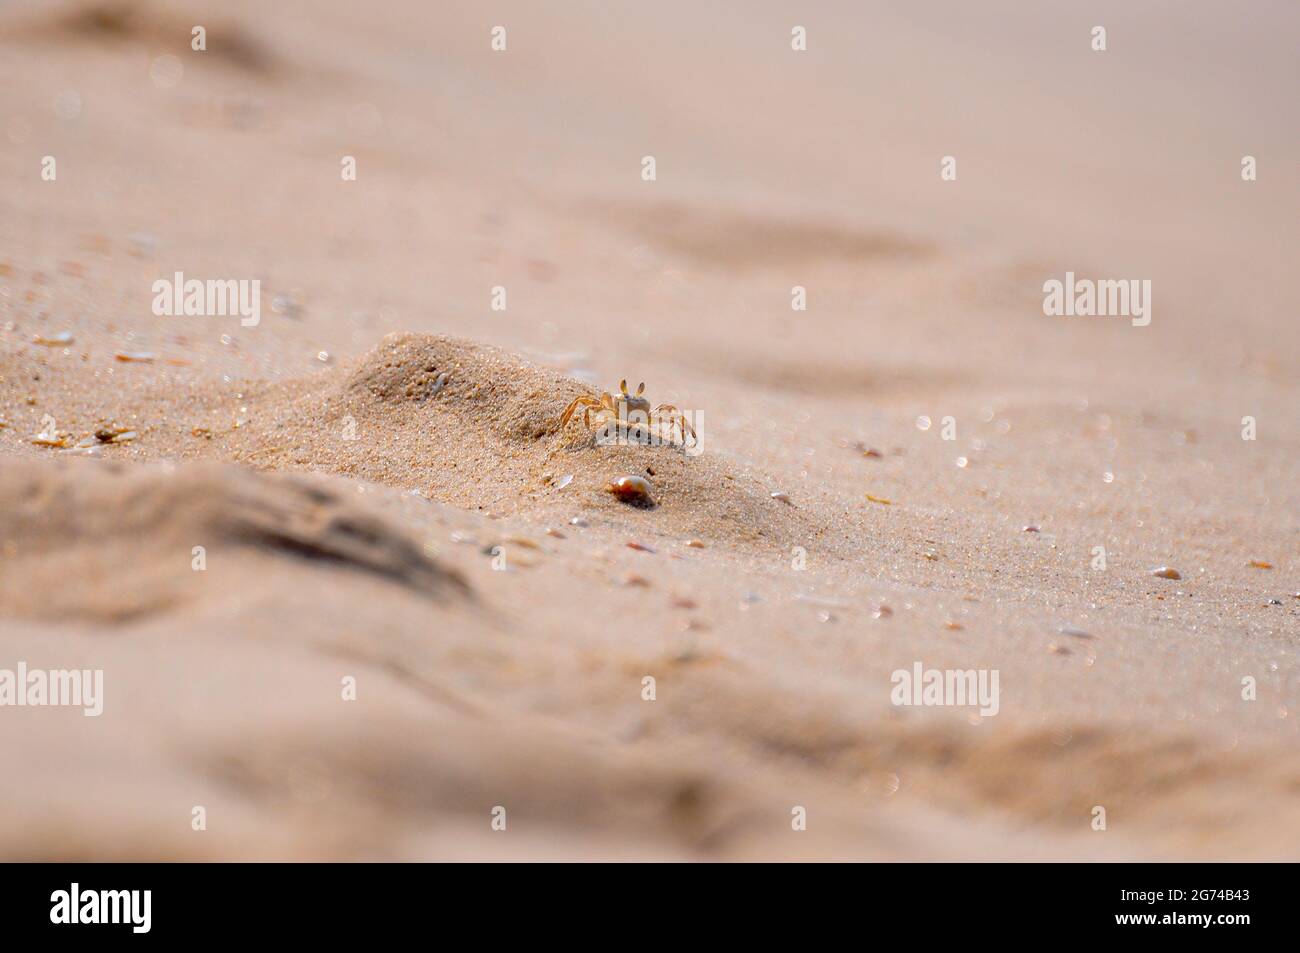 A tiny orange Galeodes sun spider walking on sand filled with small sea stones Stock Photo